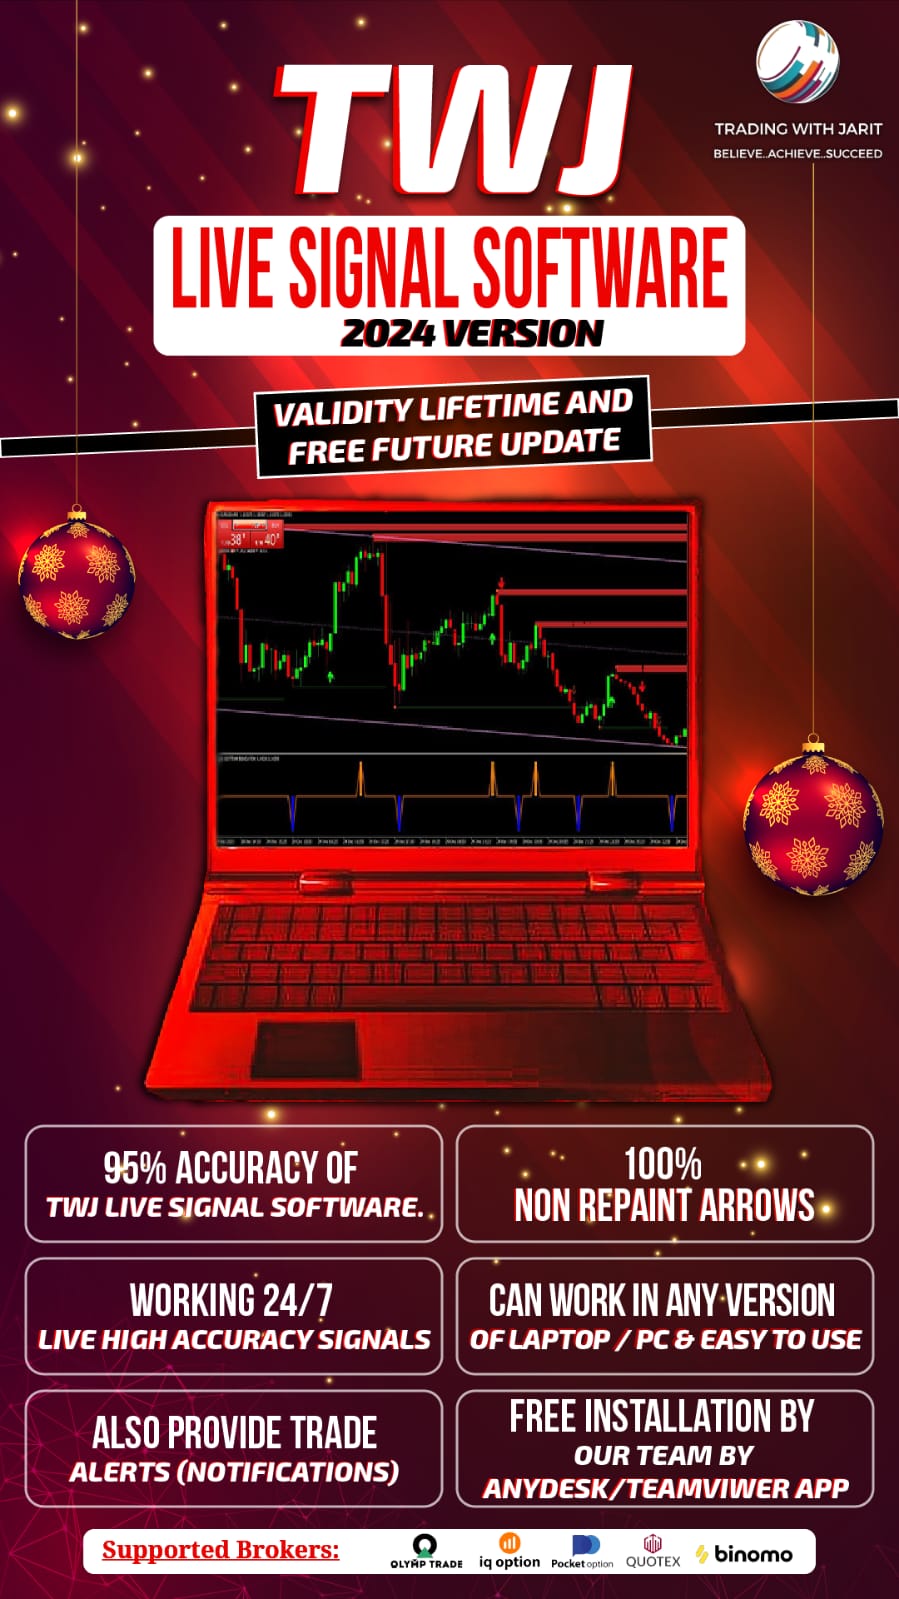 Trading With Jarit’s Live Signal Software for excellence in Manual Trading